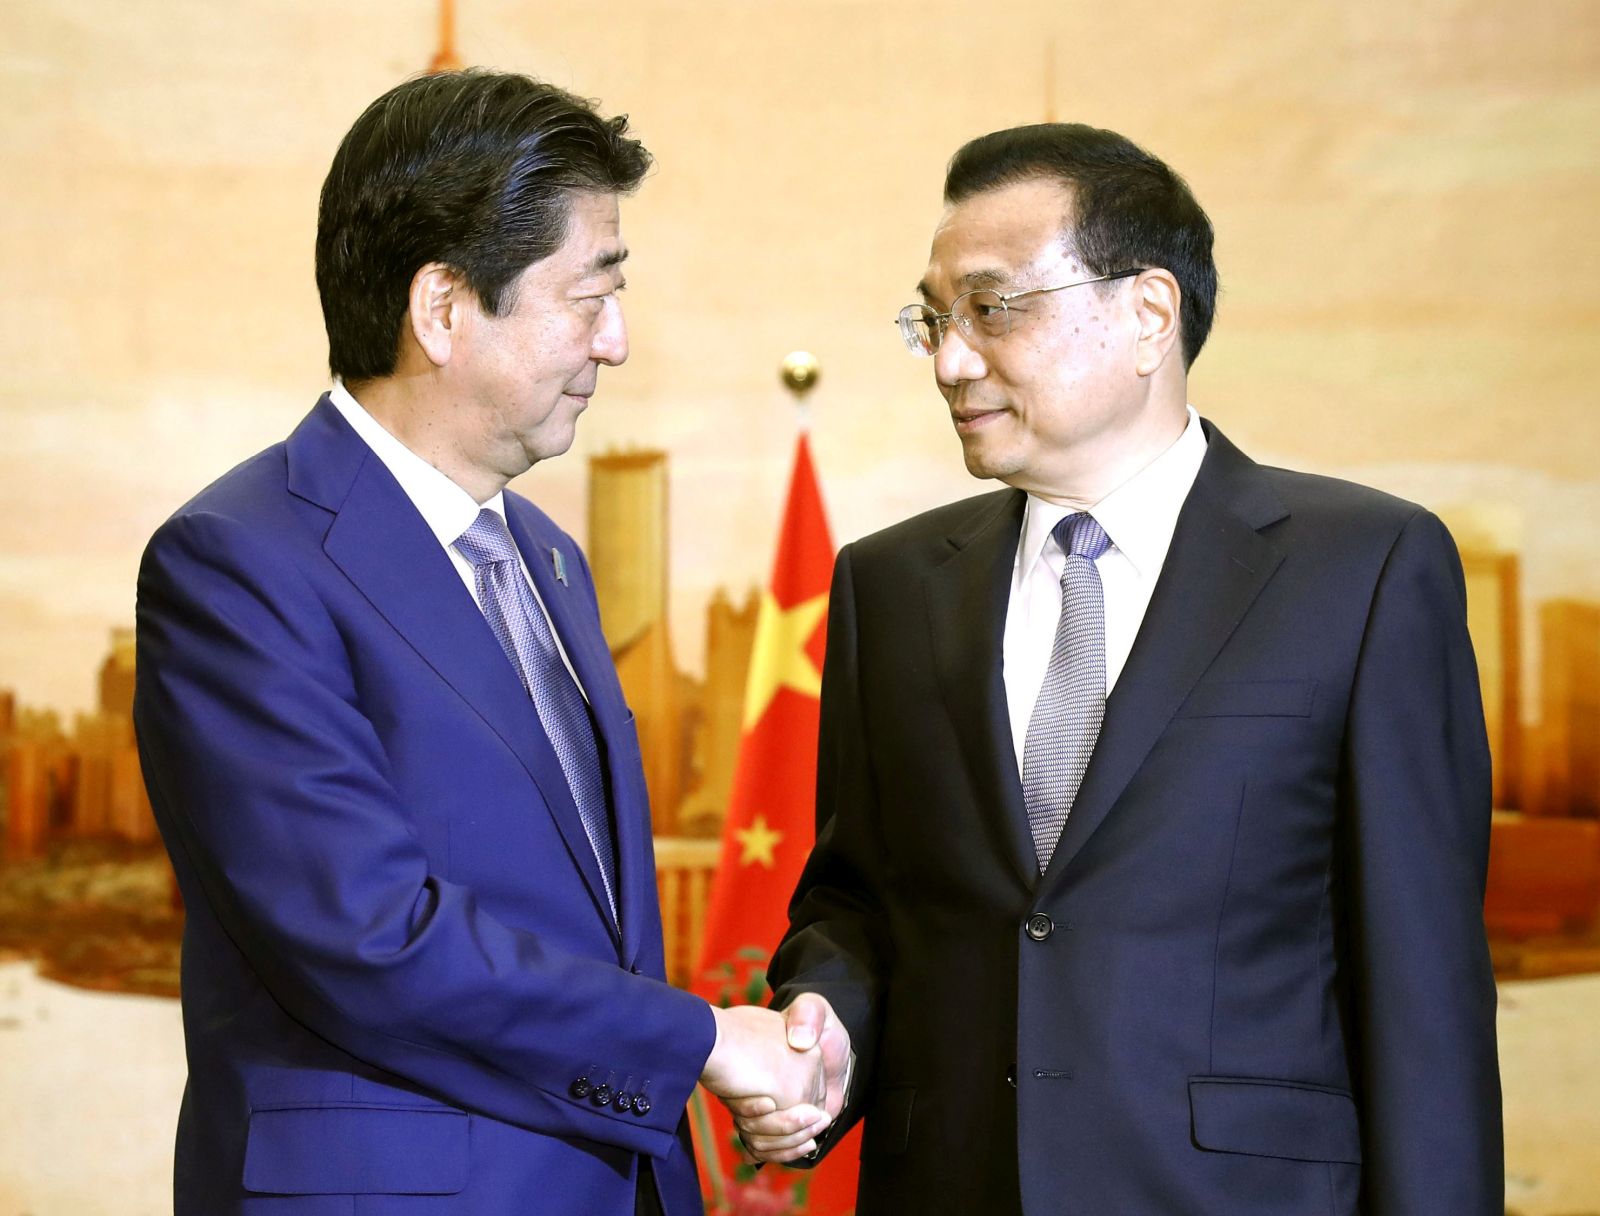 Shinzo Abe in China: Risky Move or Well-Thought-Out Strategy?